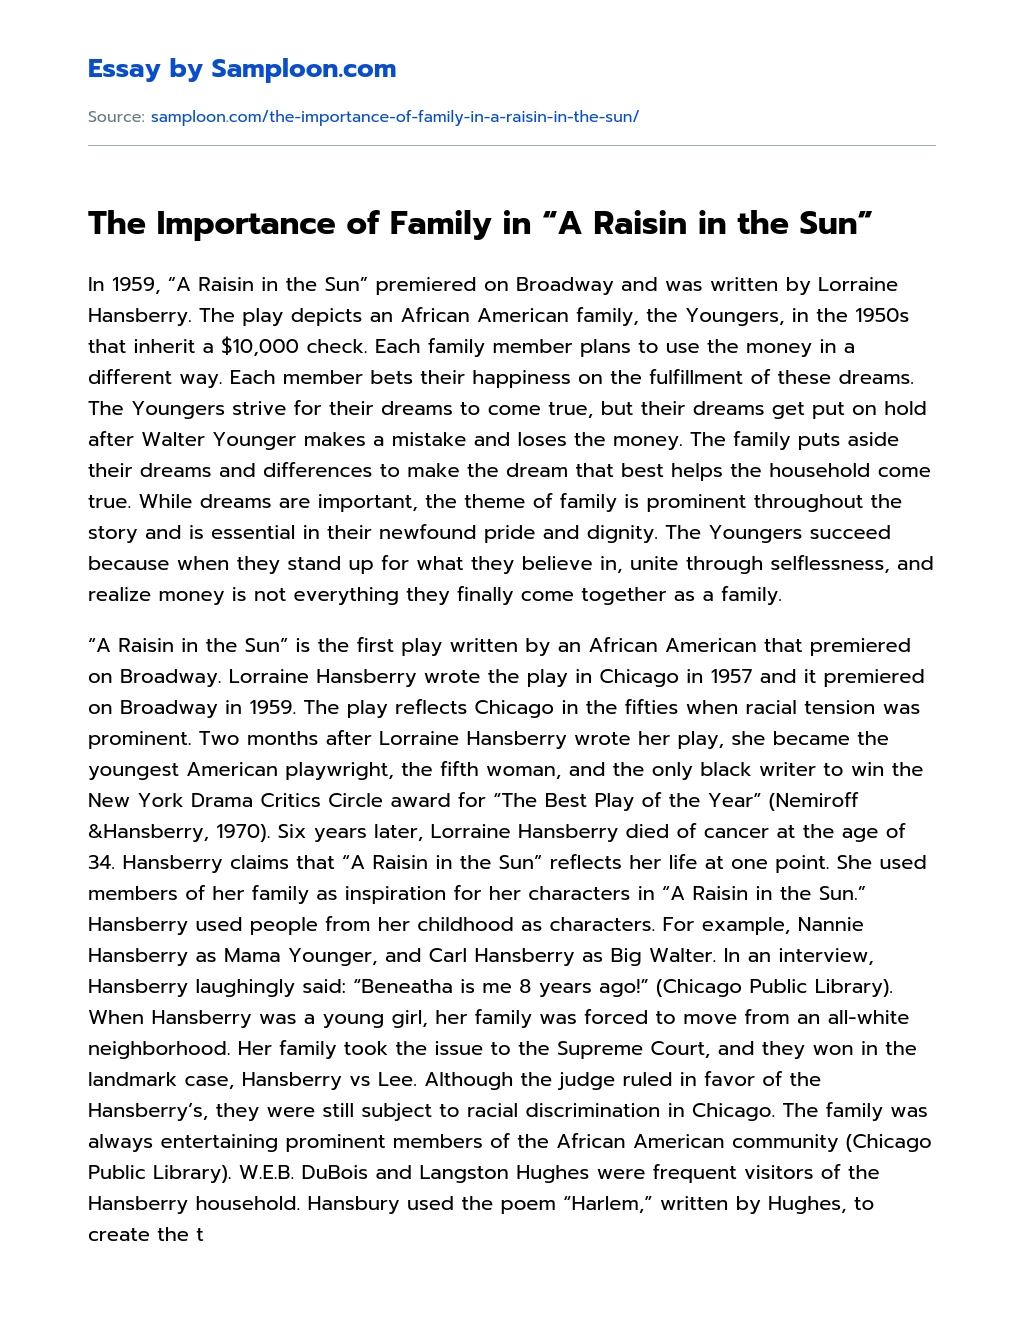 The Importance of Family in “A Raisin in the Sun” essay